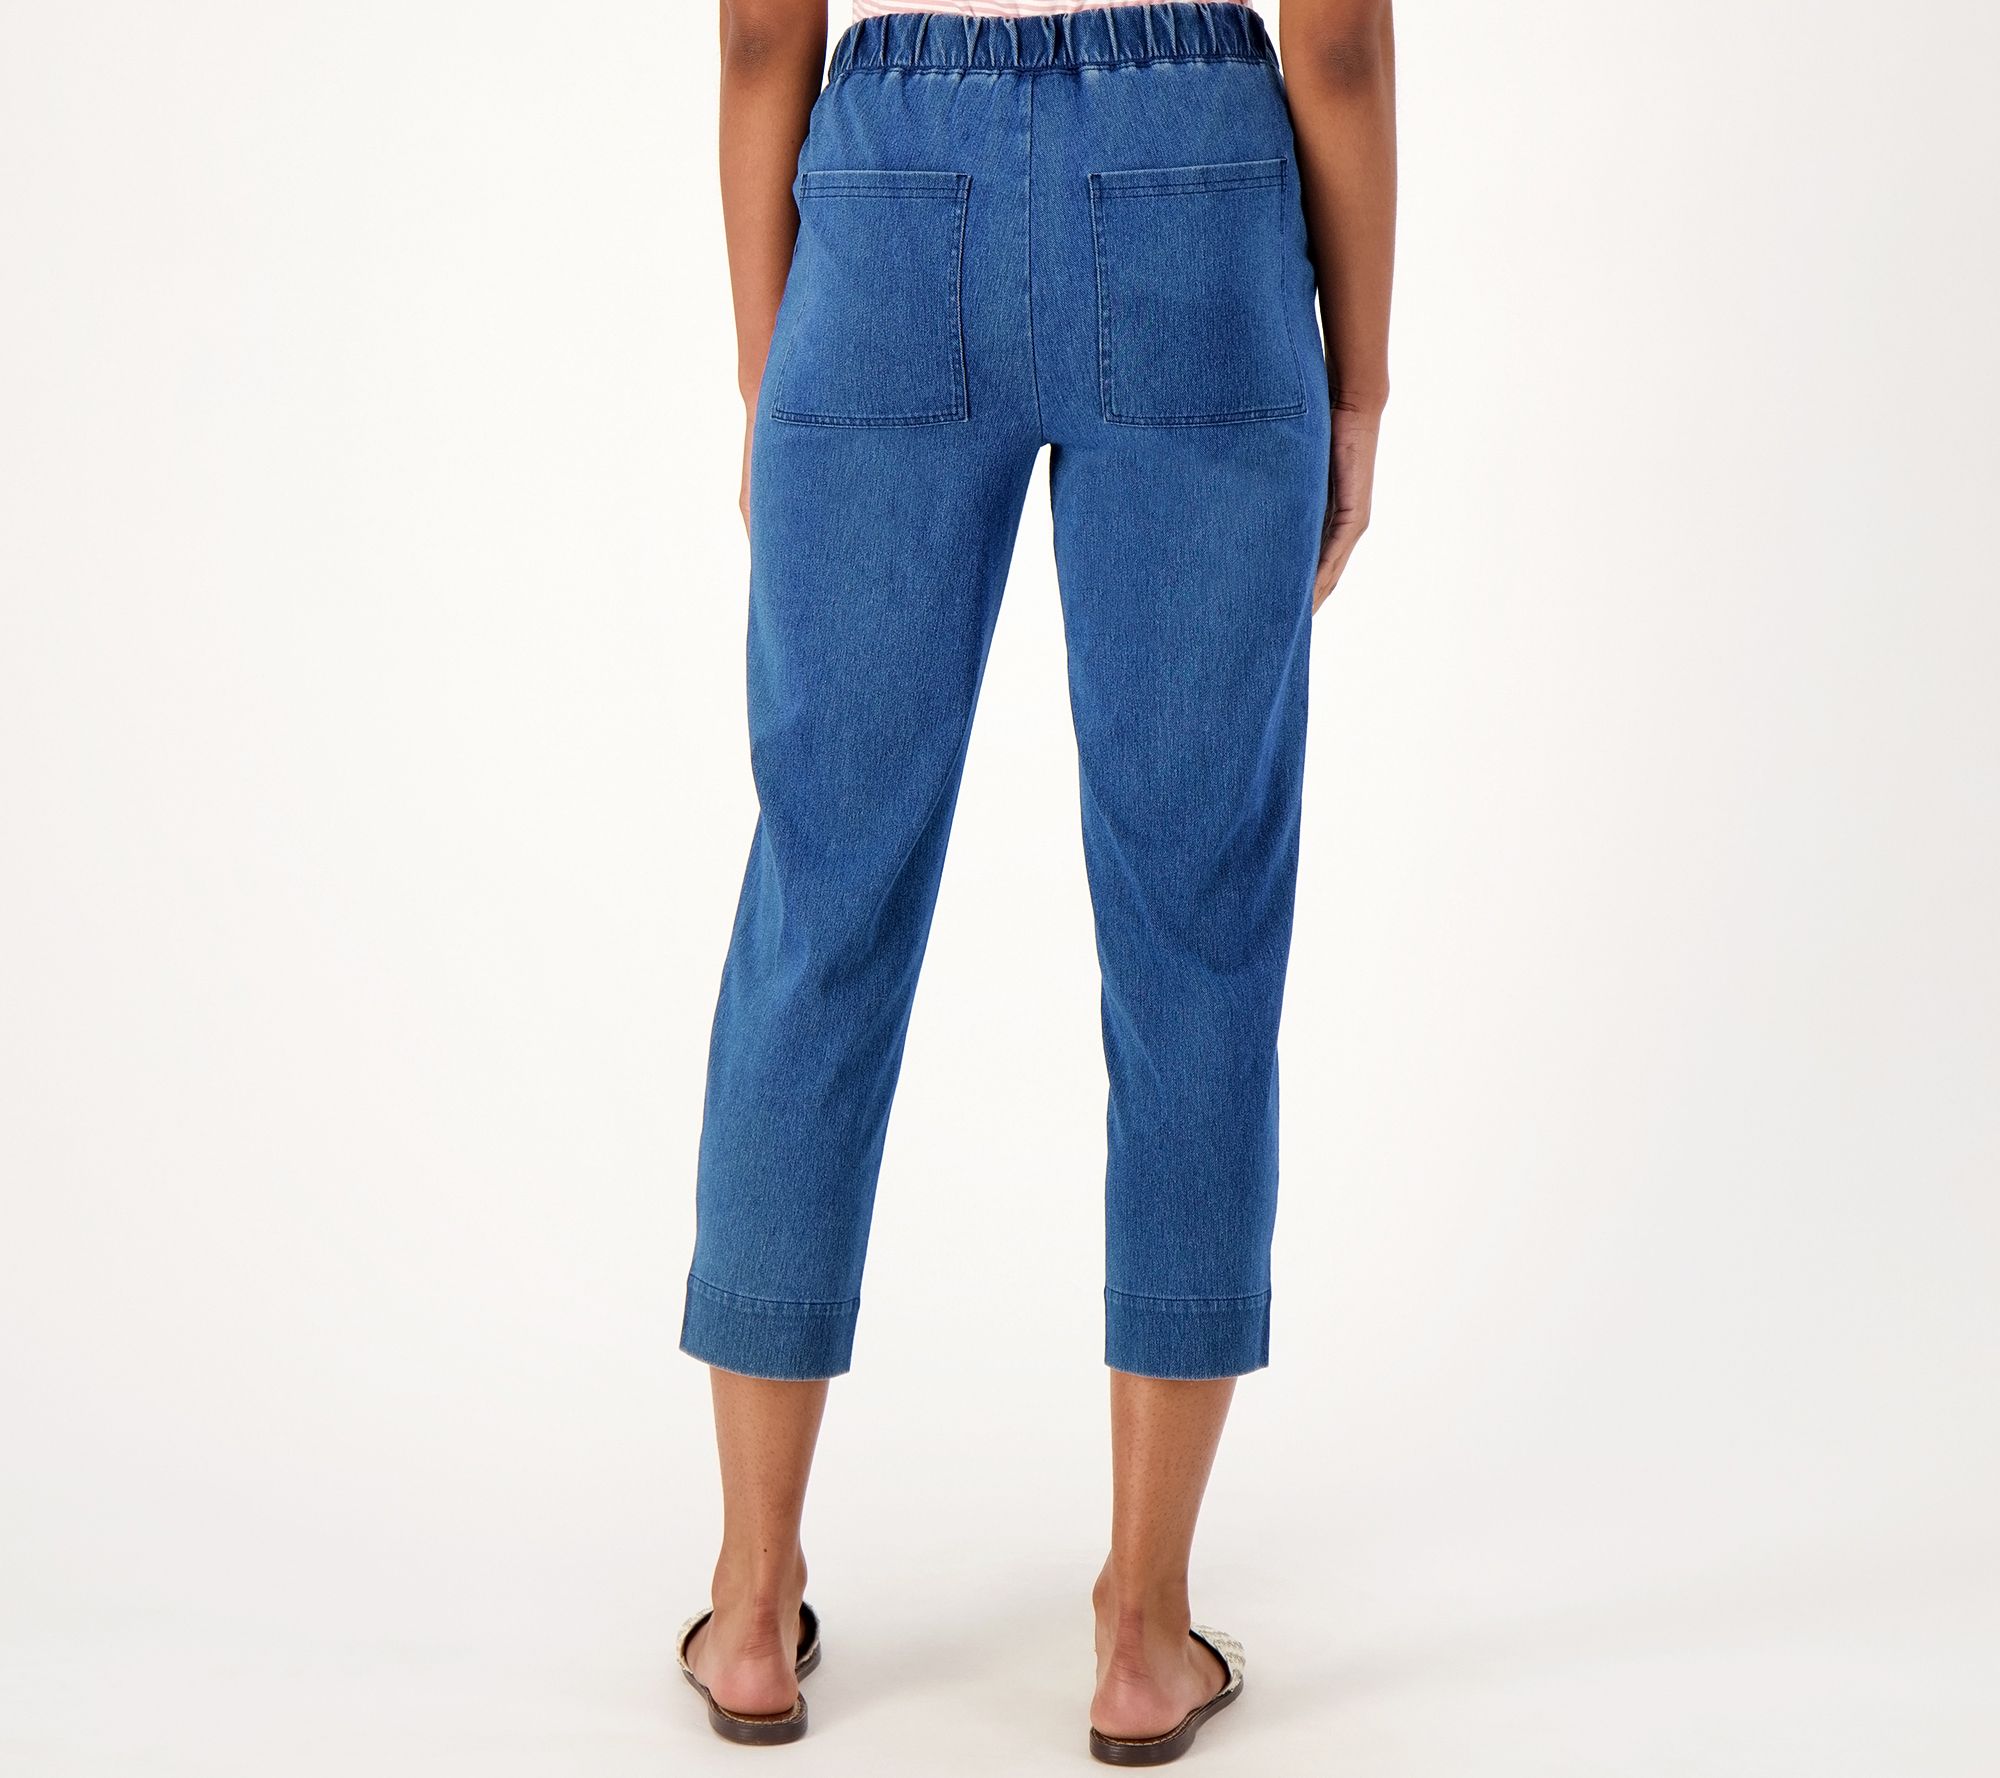 Denim & Co. Comfy Knit Air Petite Straight Crop Pant with Side Slits